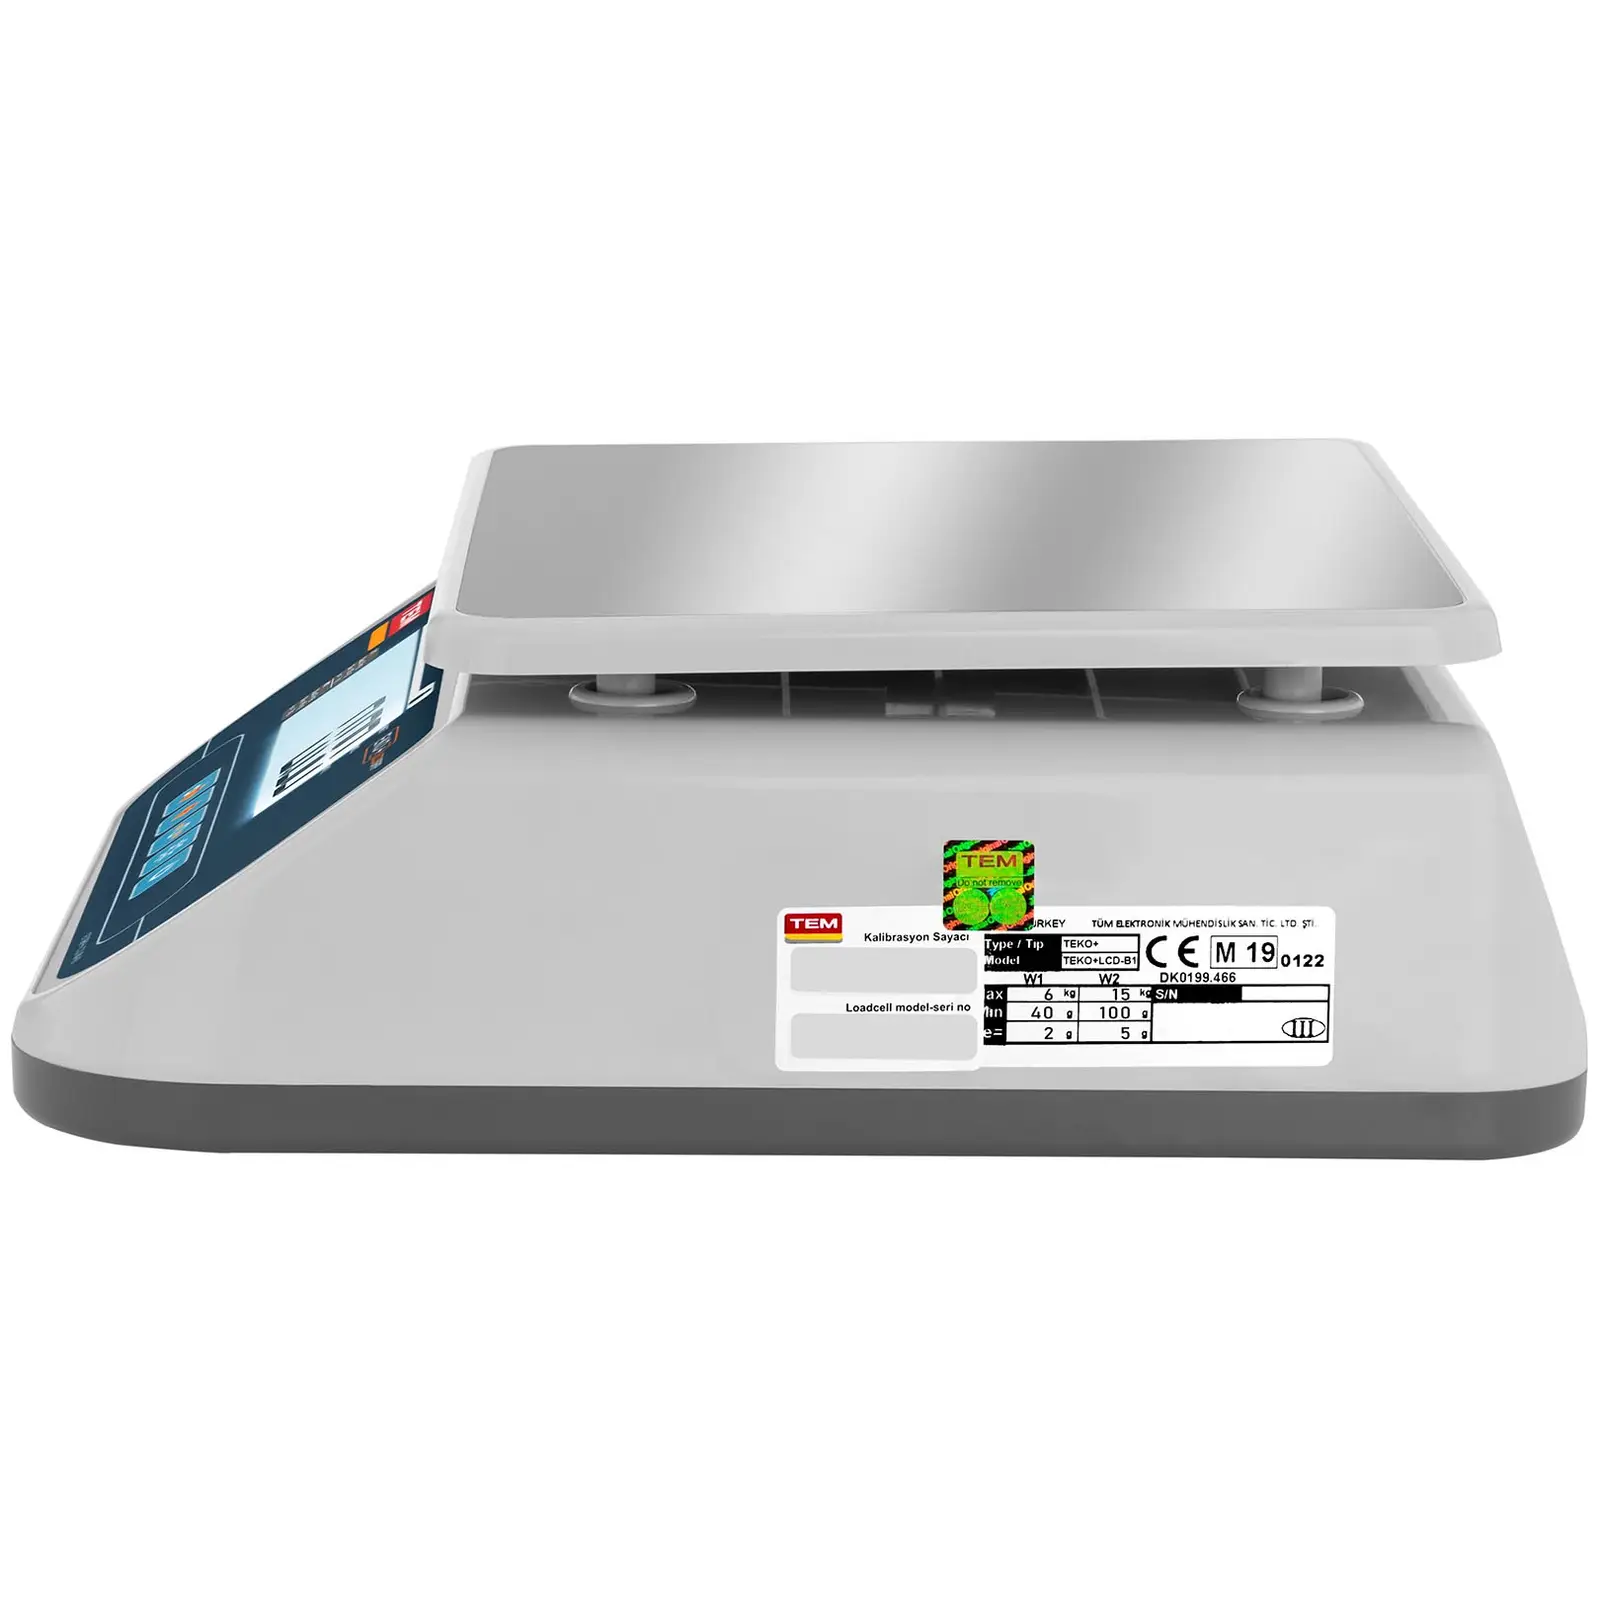 Table Scale - calibrated - 15 kg / 5 g - LCD